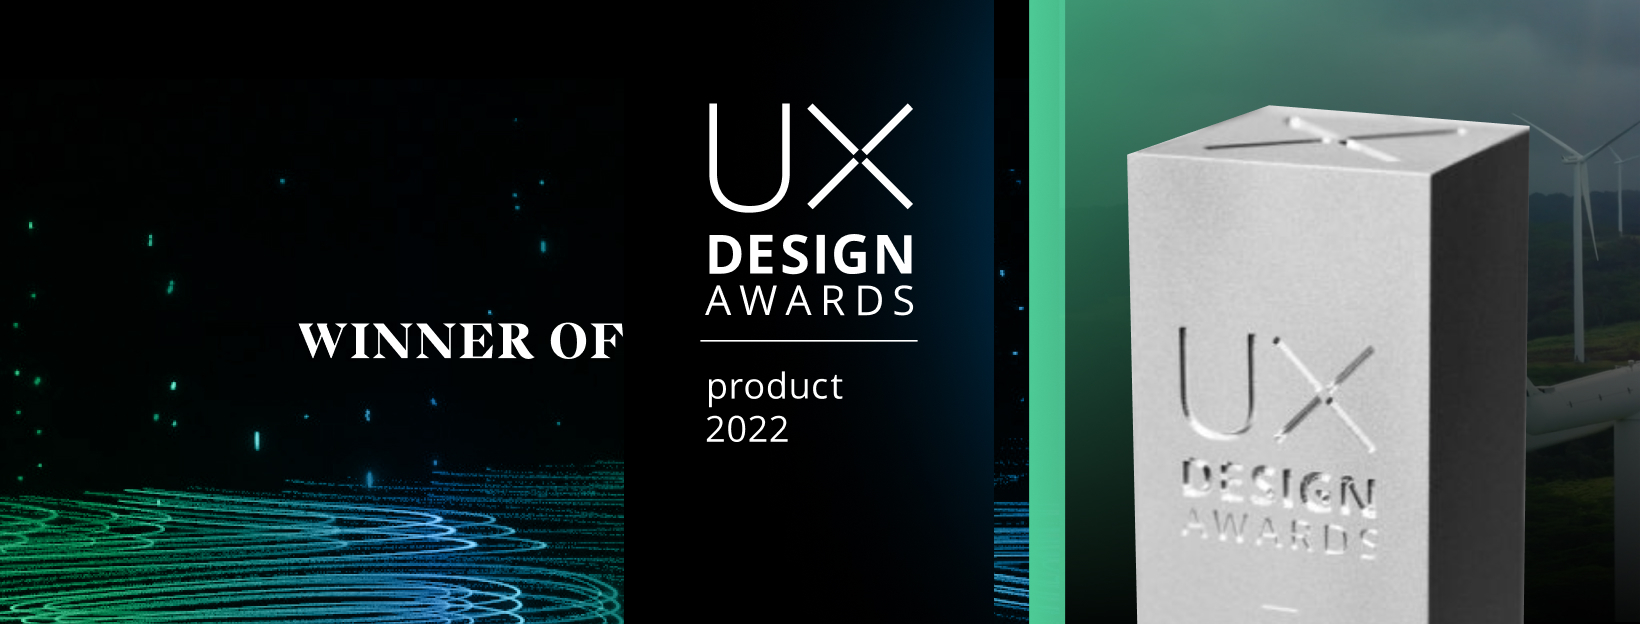 Winners of Best Product at UX Design Awards WONDR A Digital Product